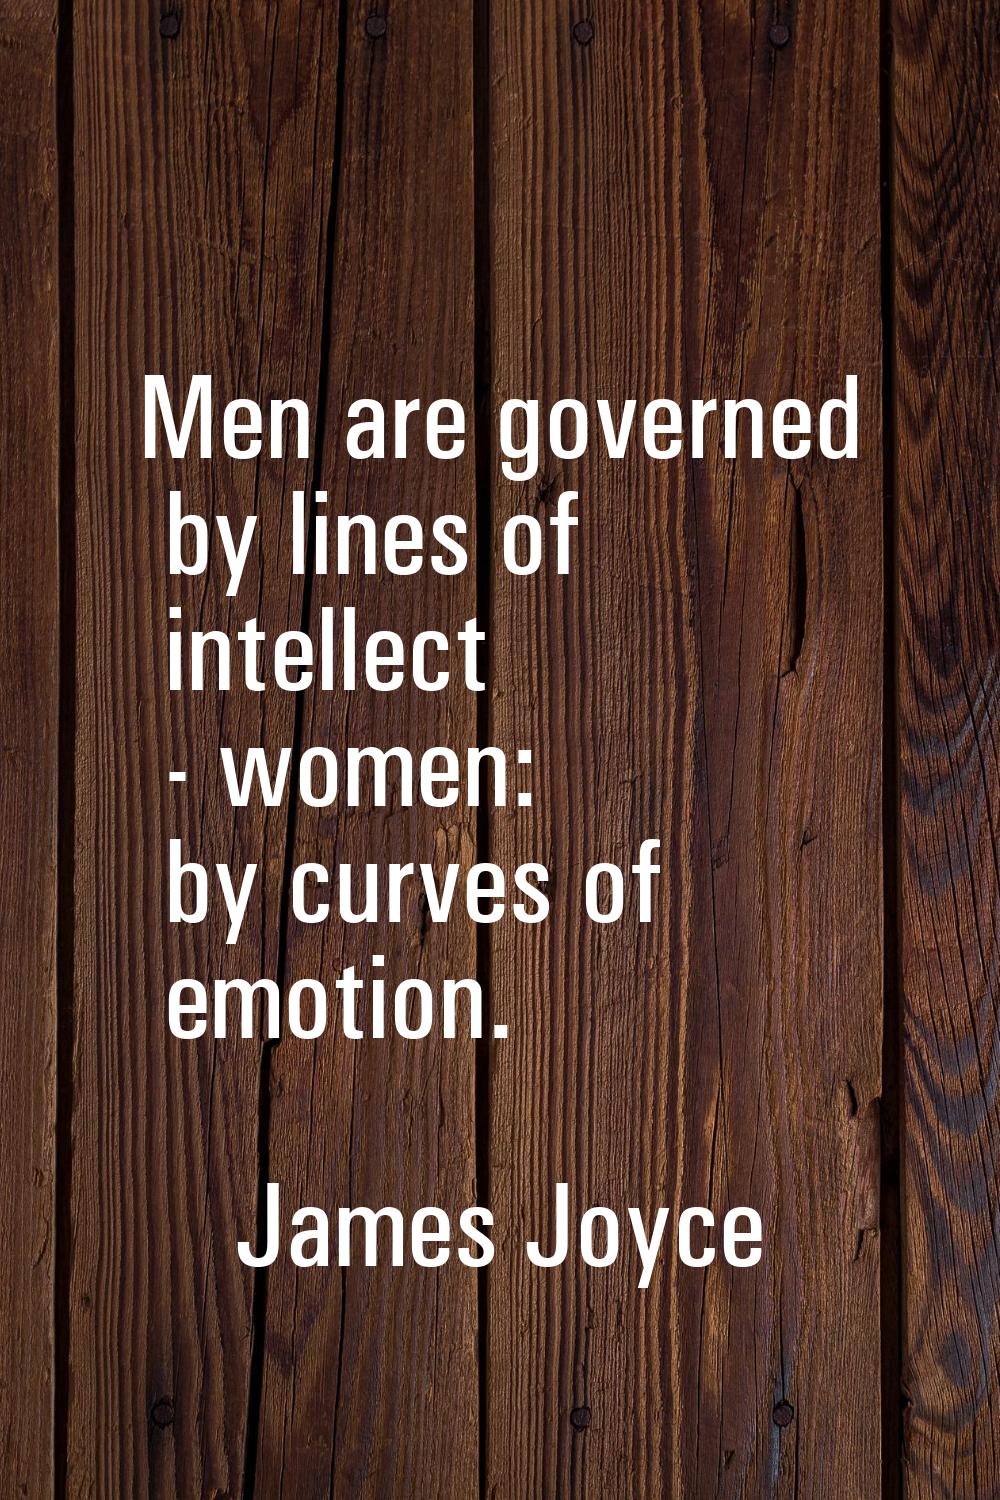 Men are governed by lines of intellect - women: by curves of emotion.